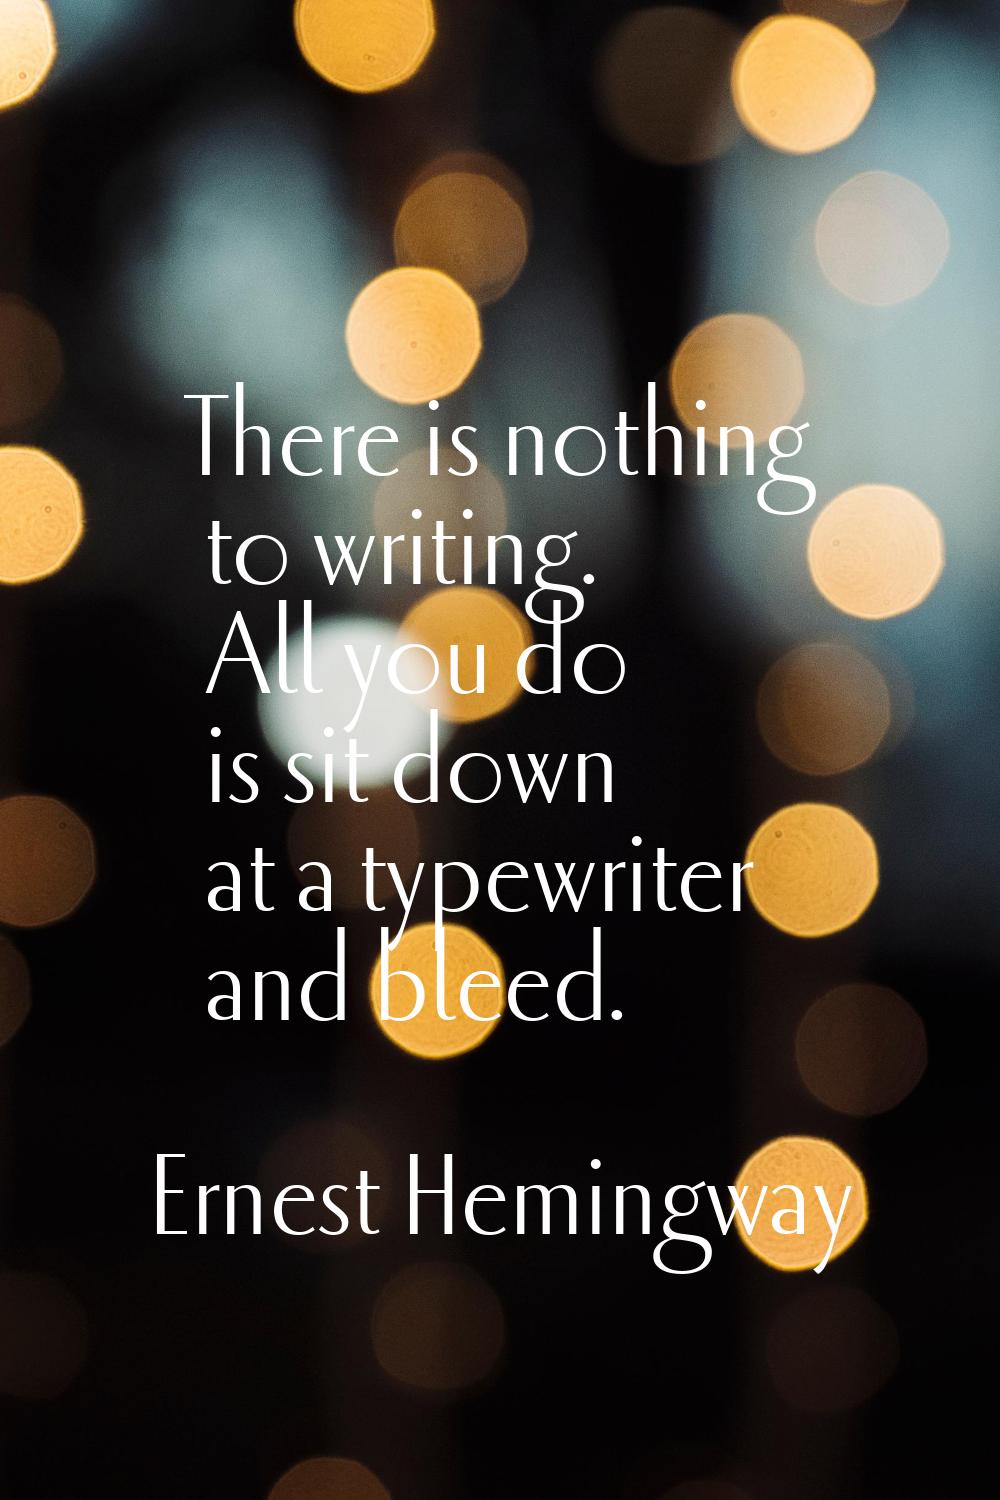 There is nothing to writing. All you do is sit down at a typewriter and bleed.